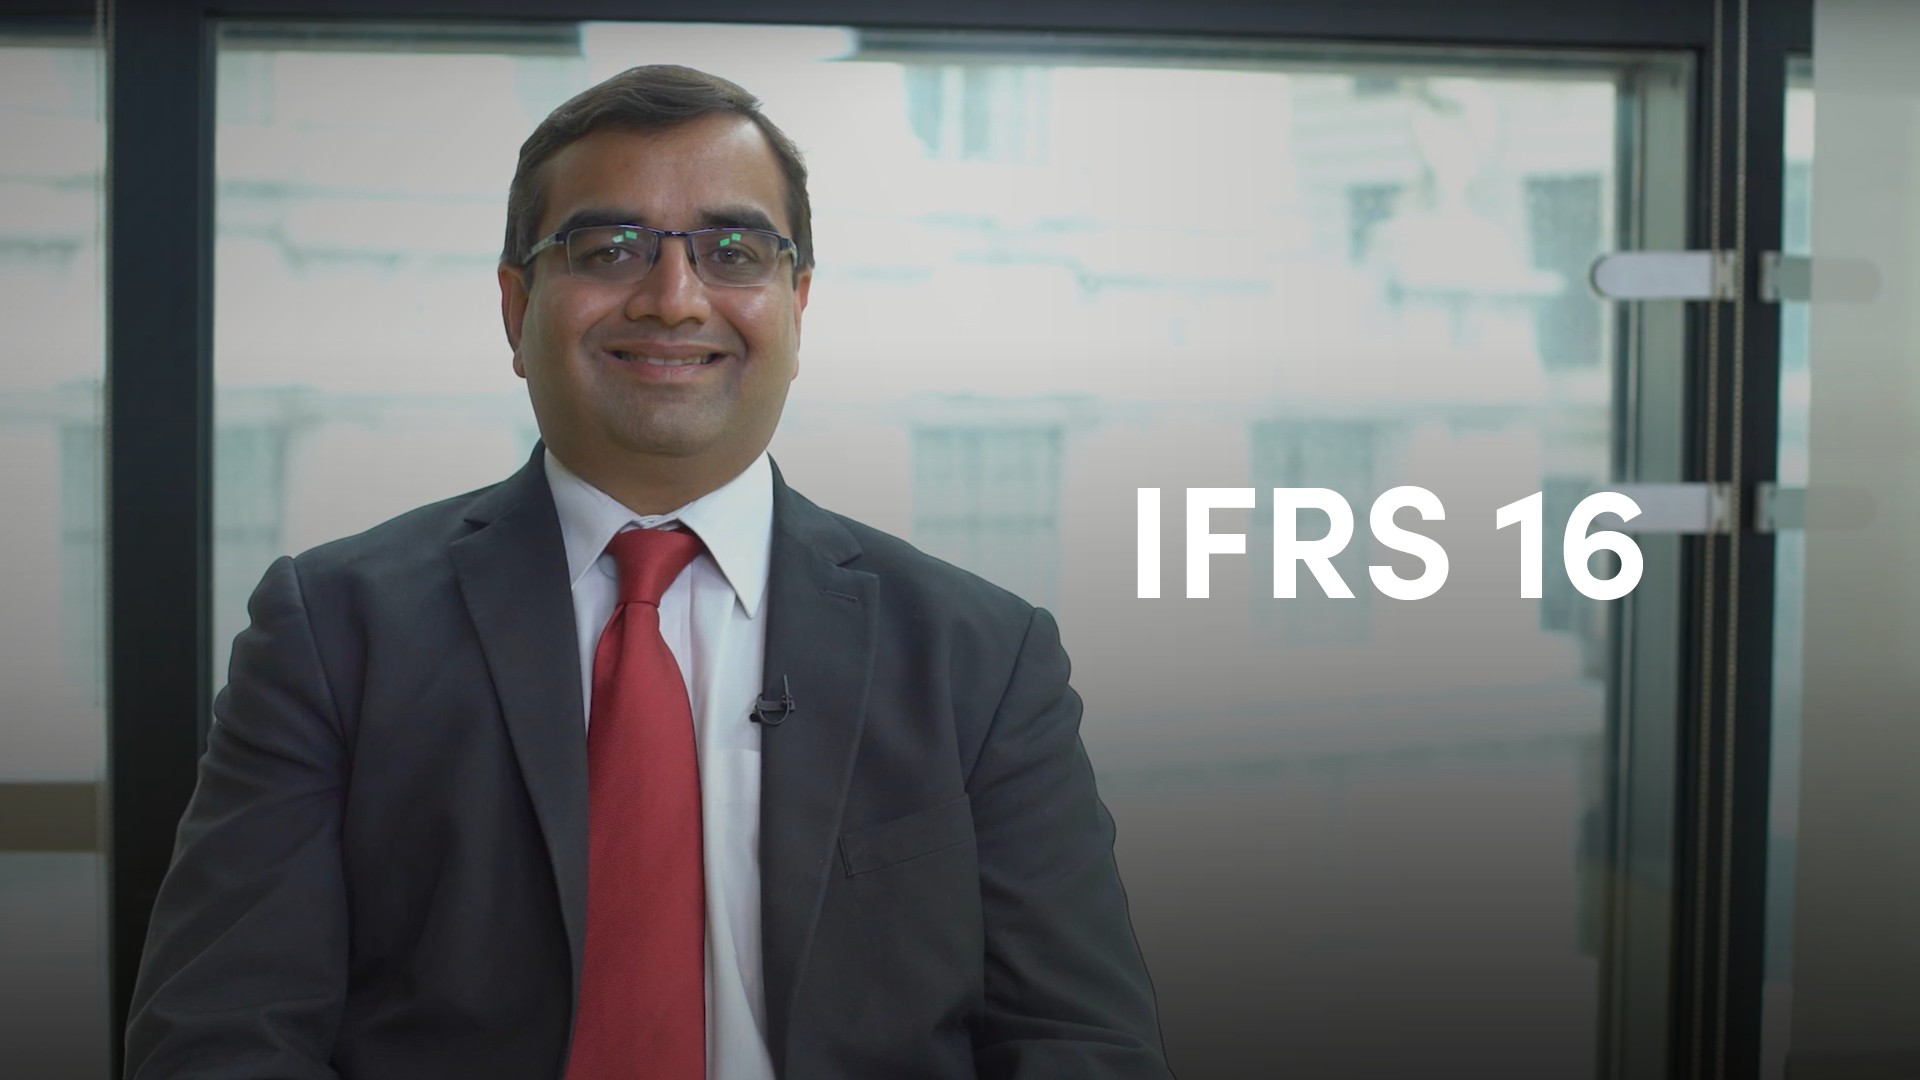 IFRS 16 Background